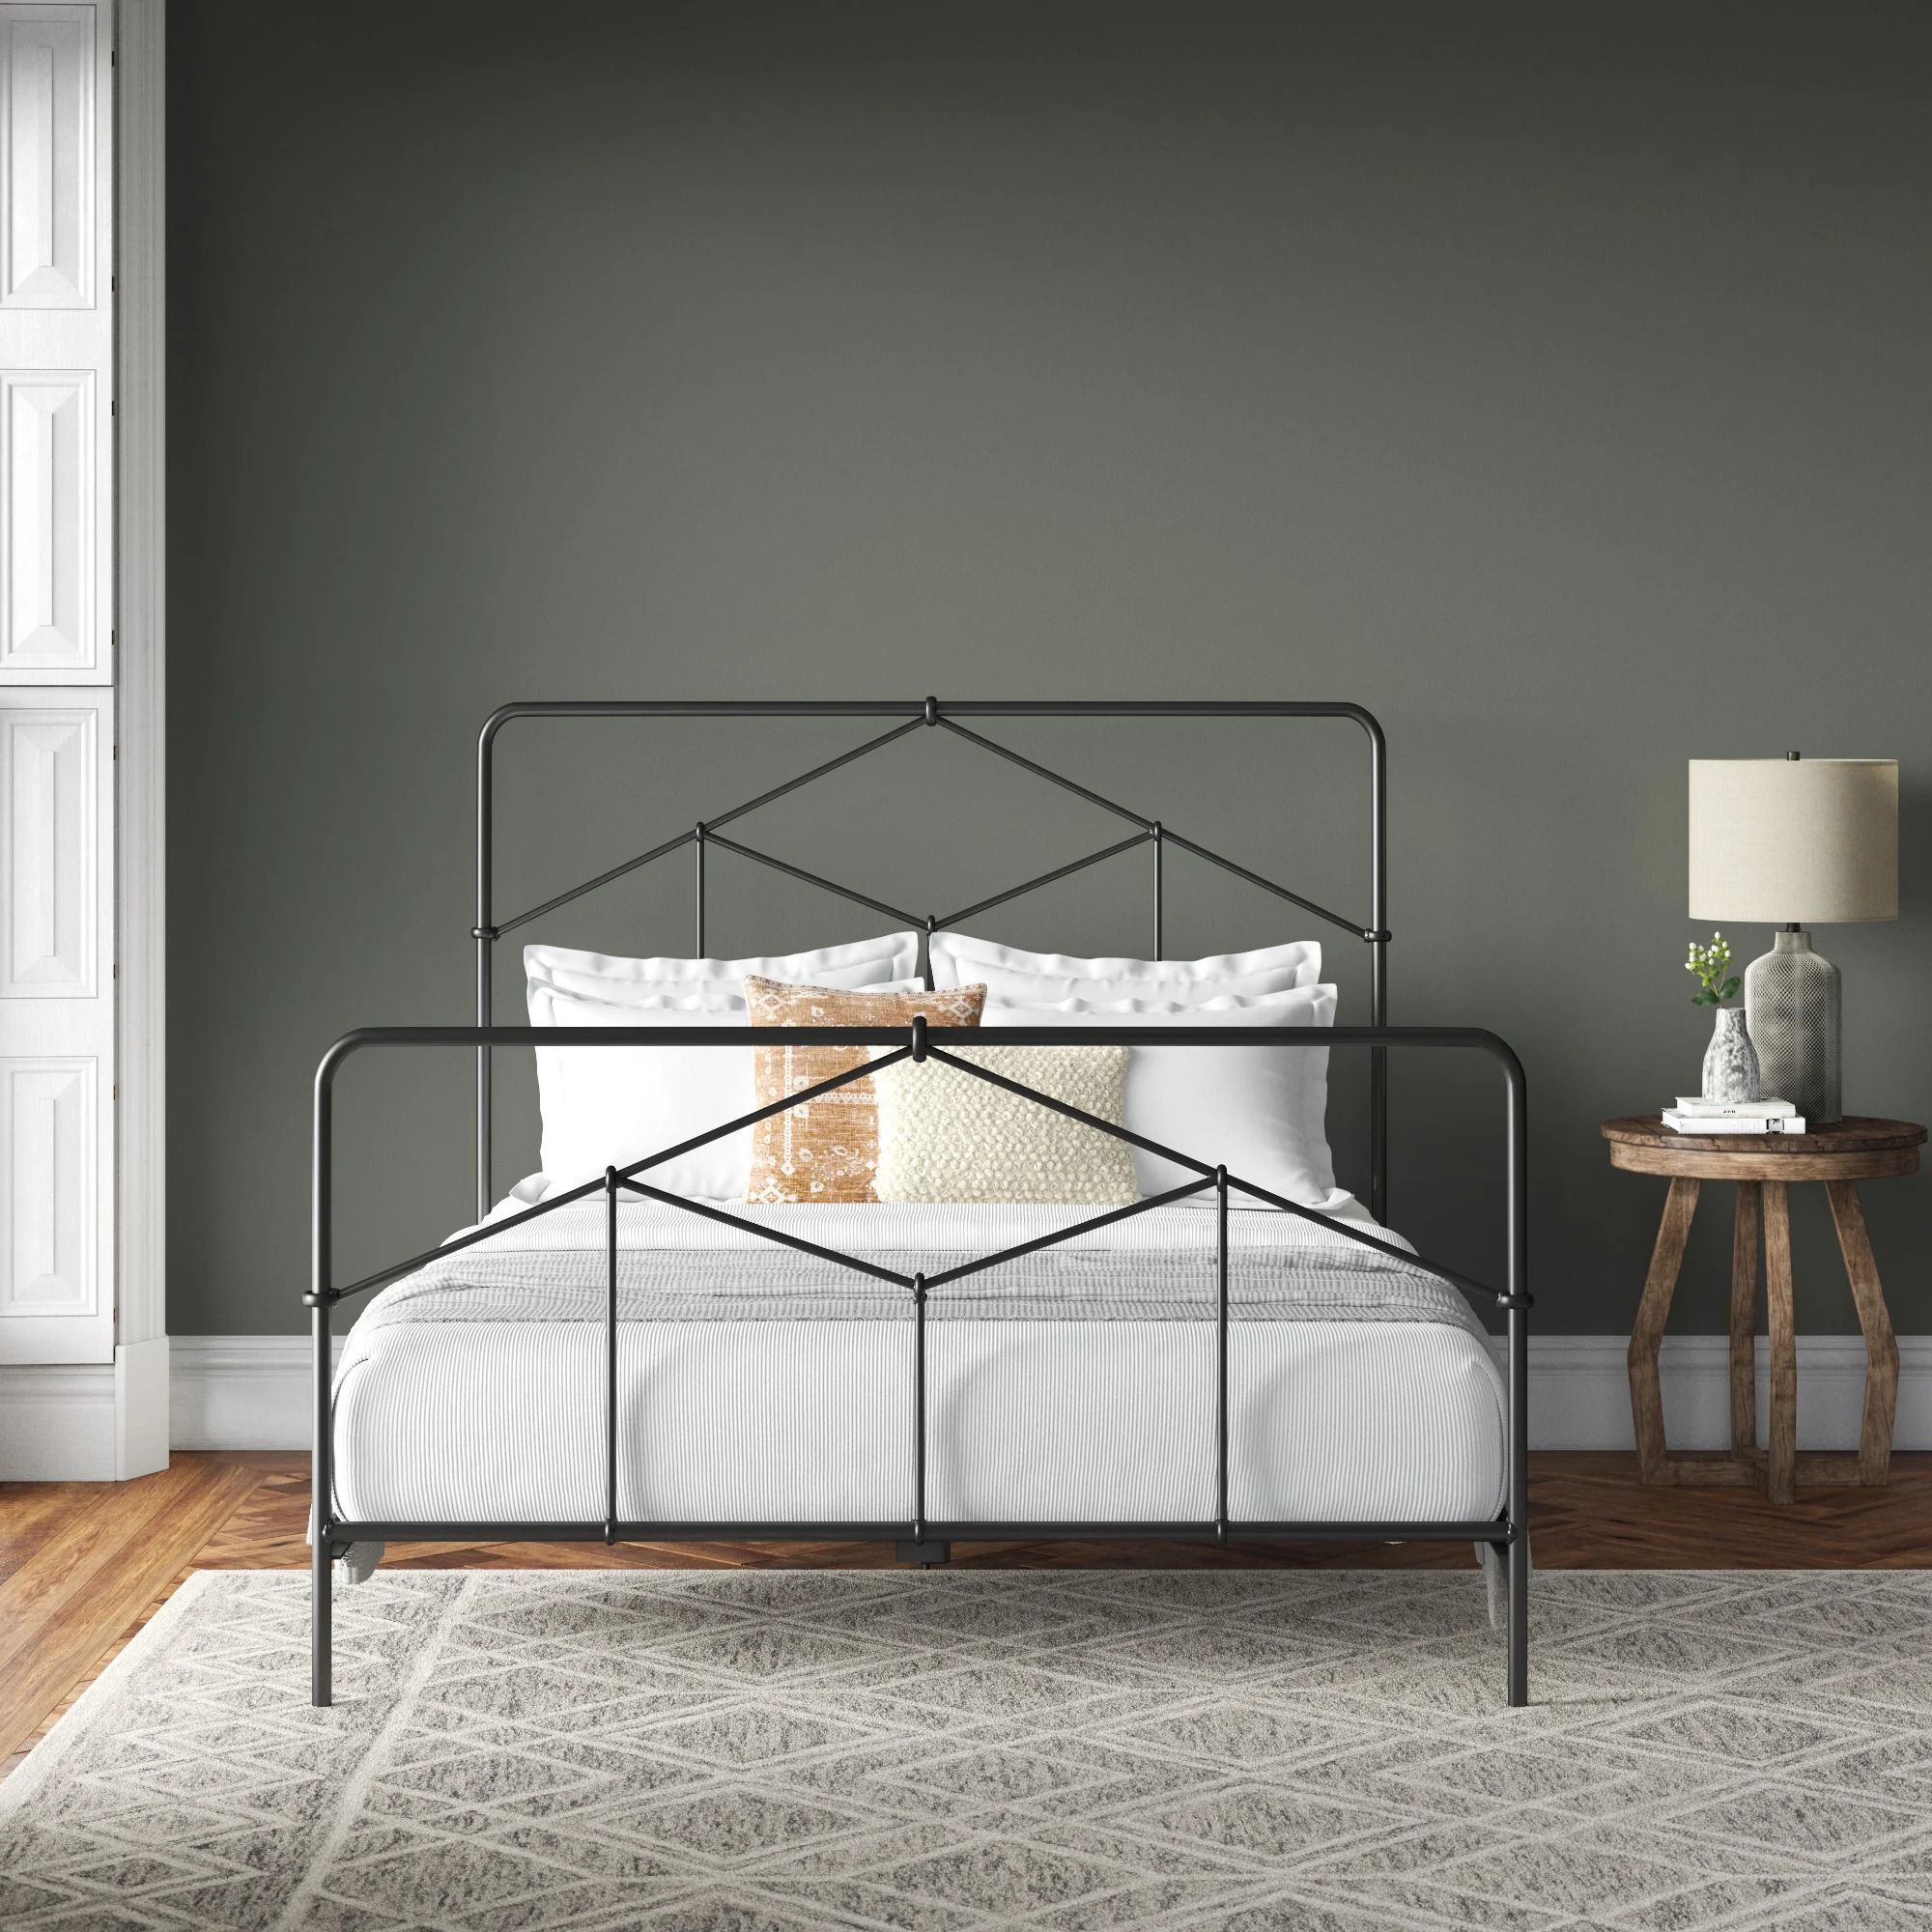 10 Best Box Spring Bed Frames Beds, Bed Frame With Box Spring Built In